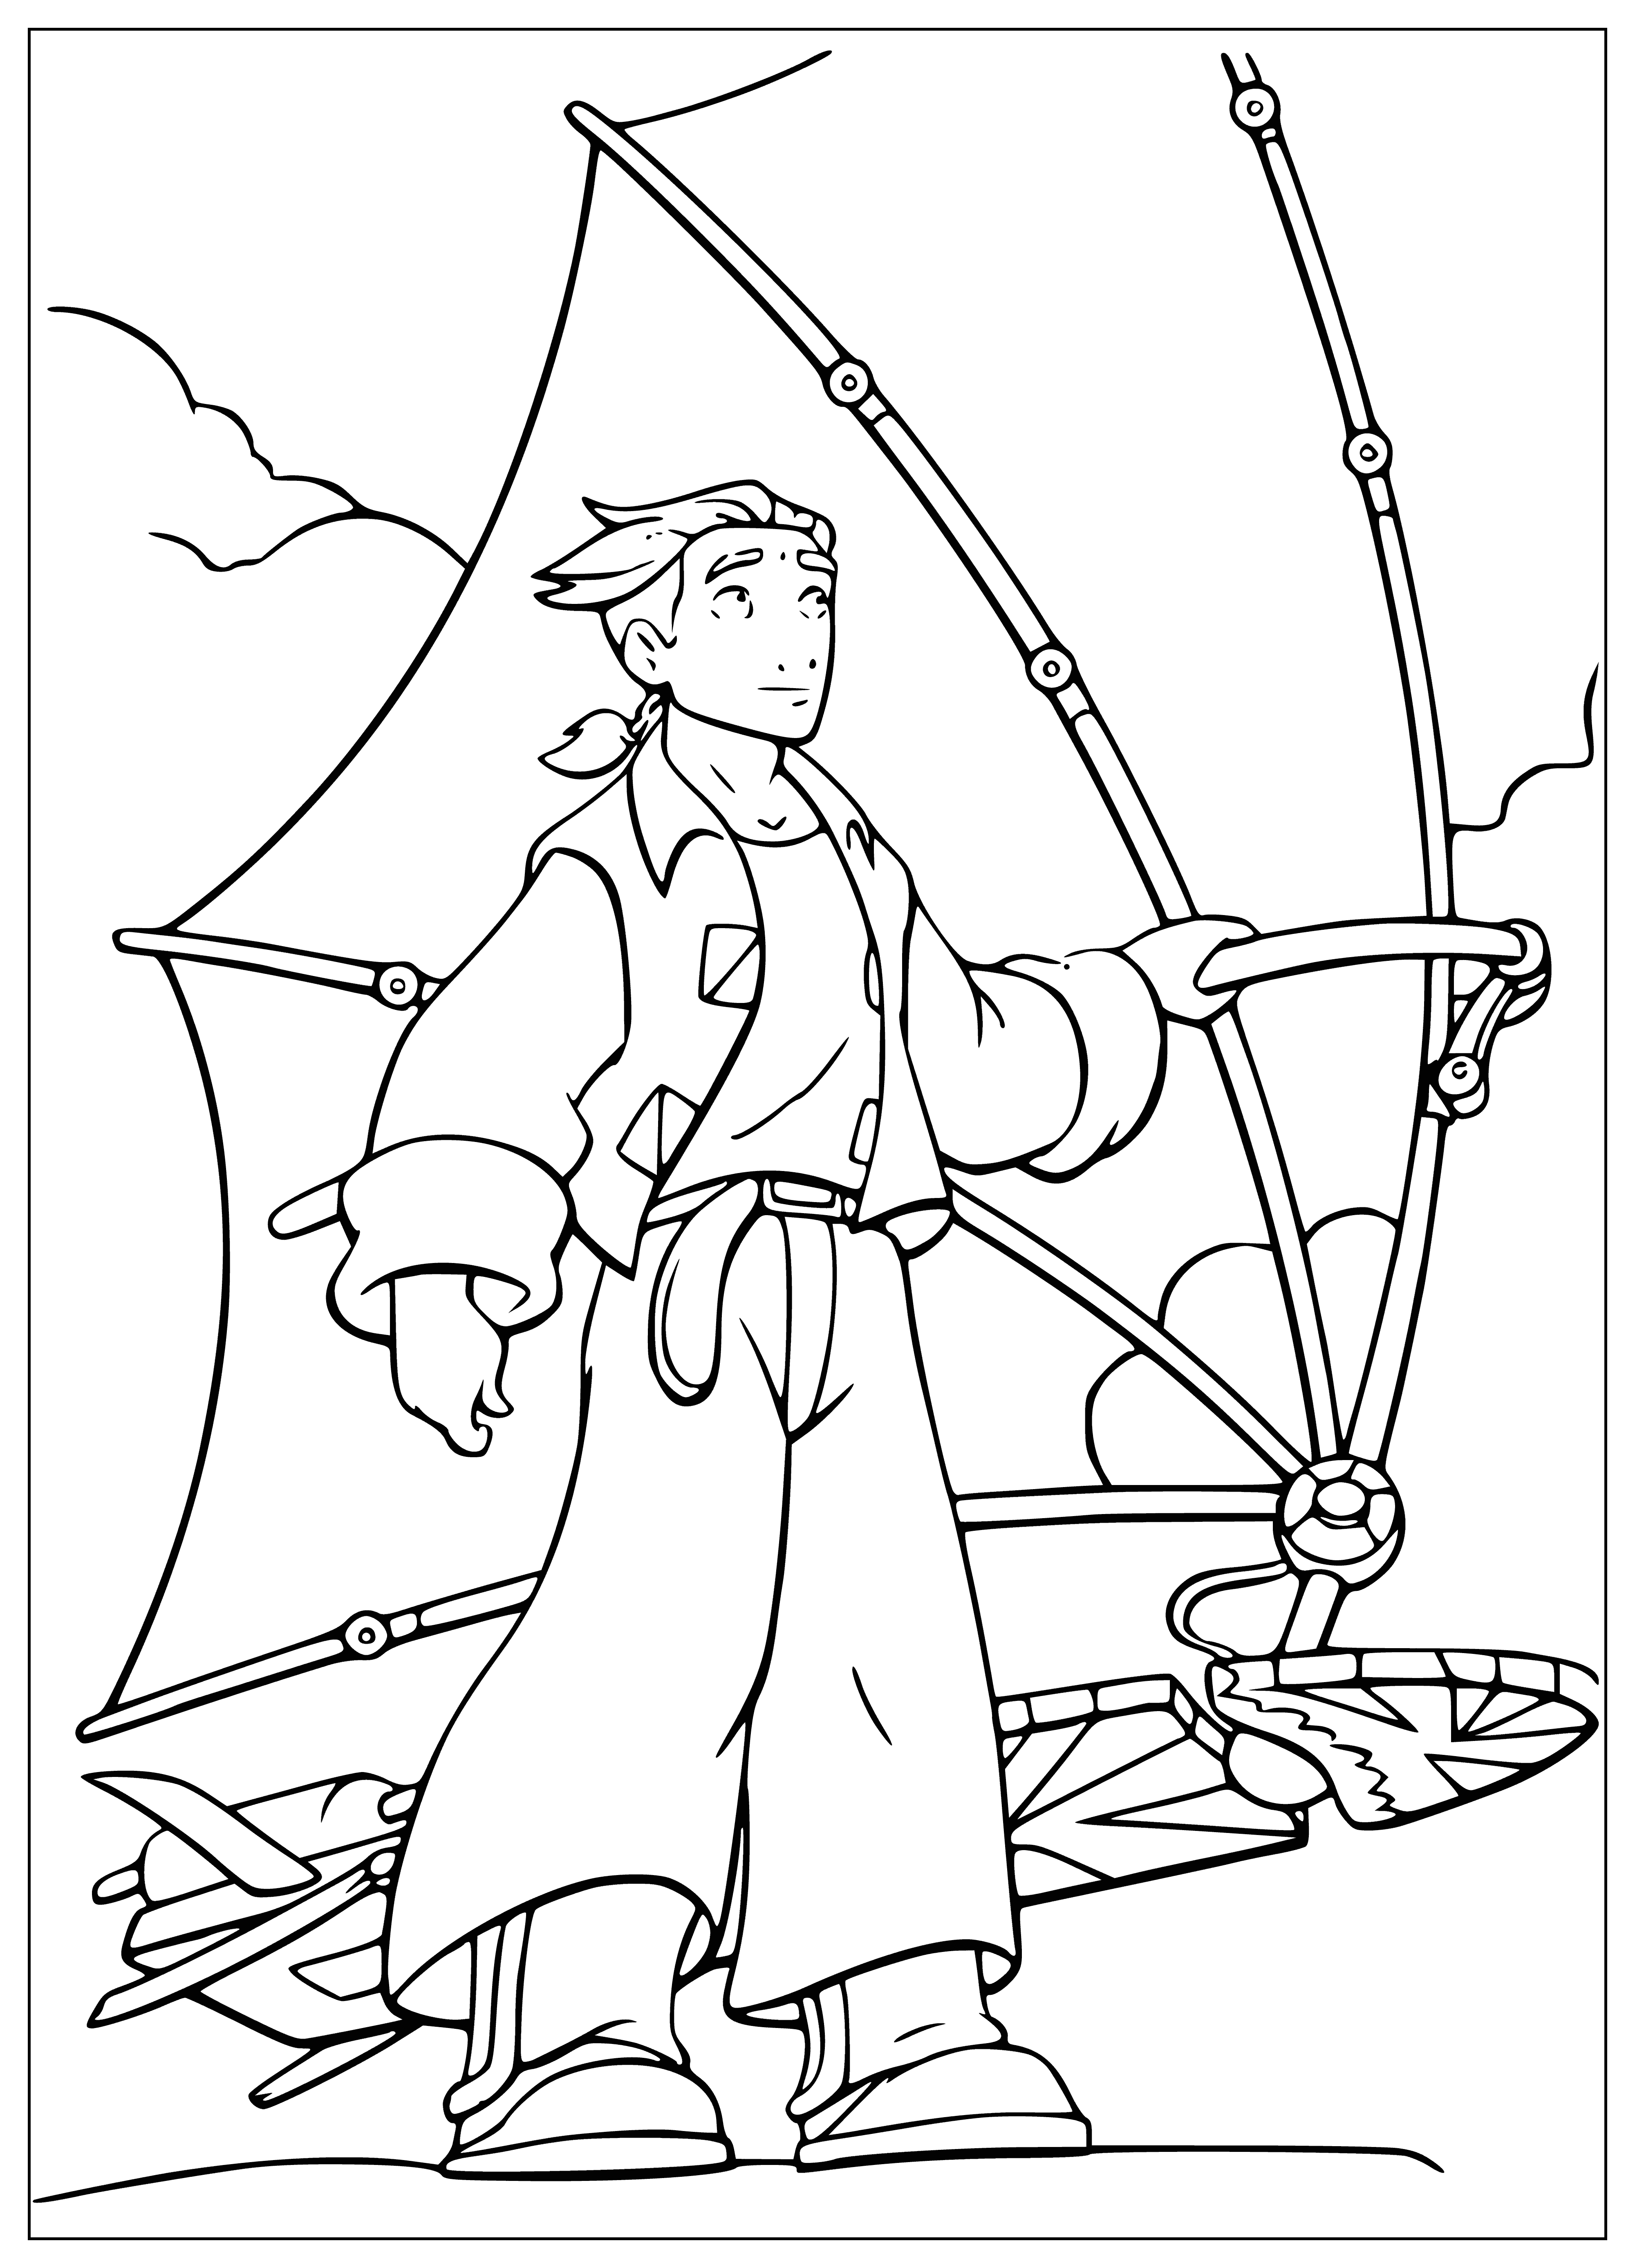 coloring page: Sailing ship basks in the sun, sails aloft, flag atop the mast, distant on the calm waters. #seascape